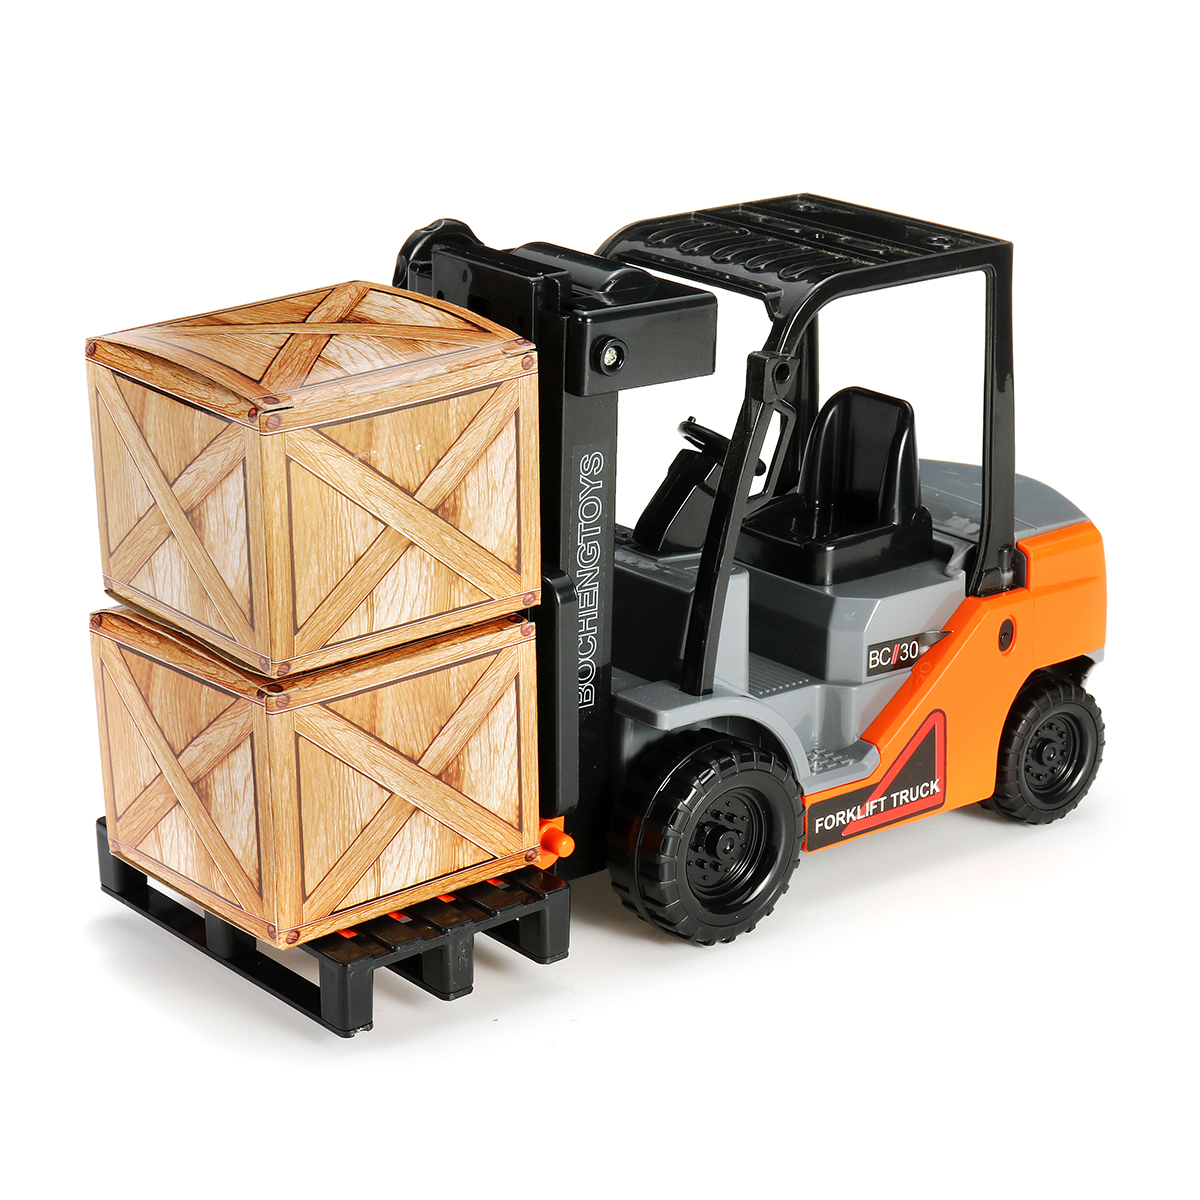 Working Wood Construction Toy Truck USA FORKLIFT with PALLET